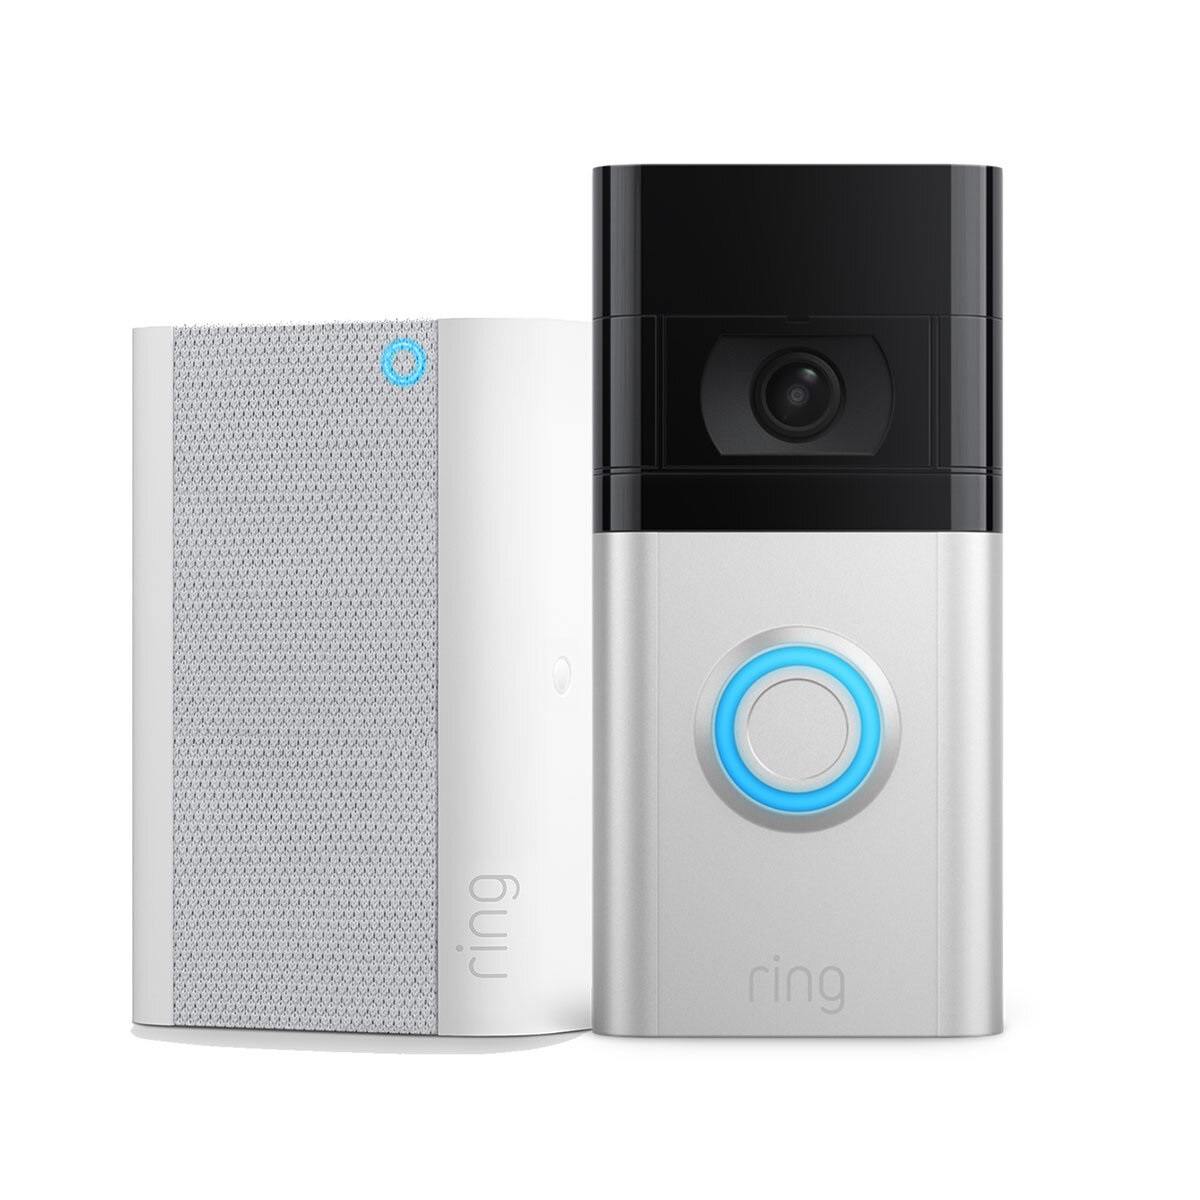 10 Best Video Doorbell With Chime for 2023